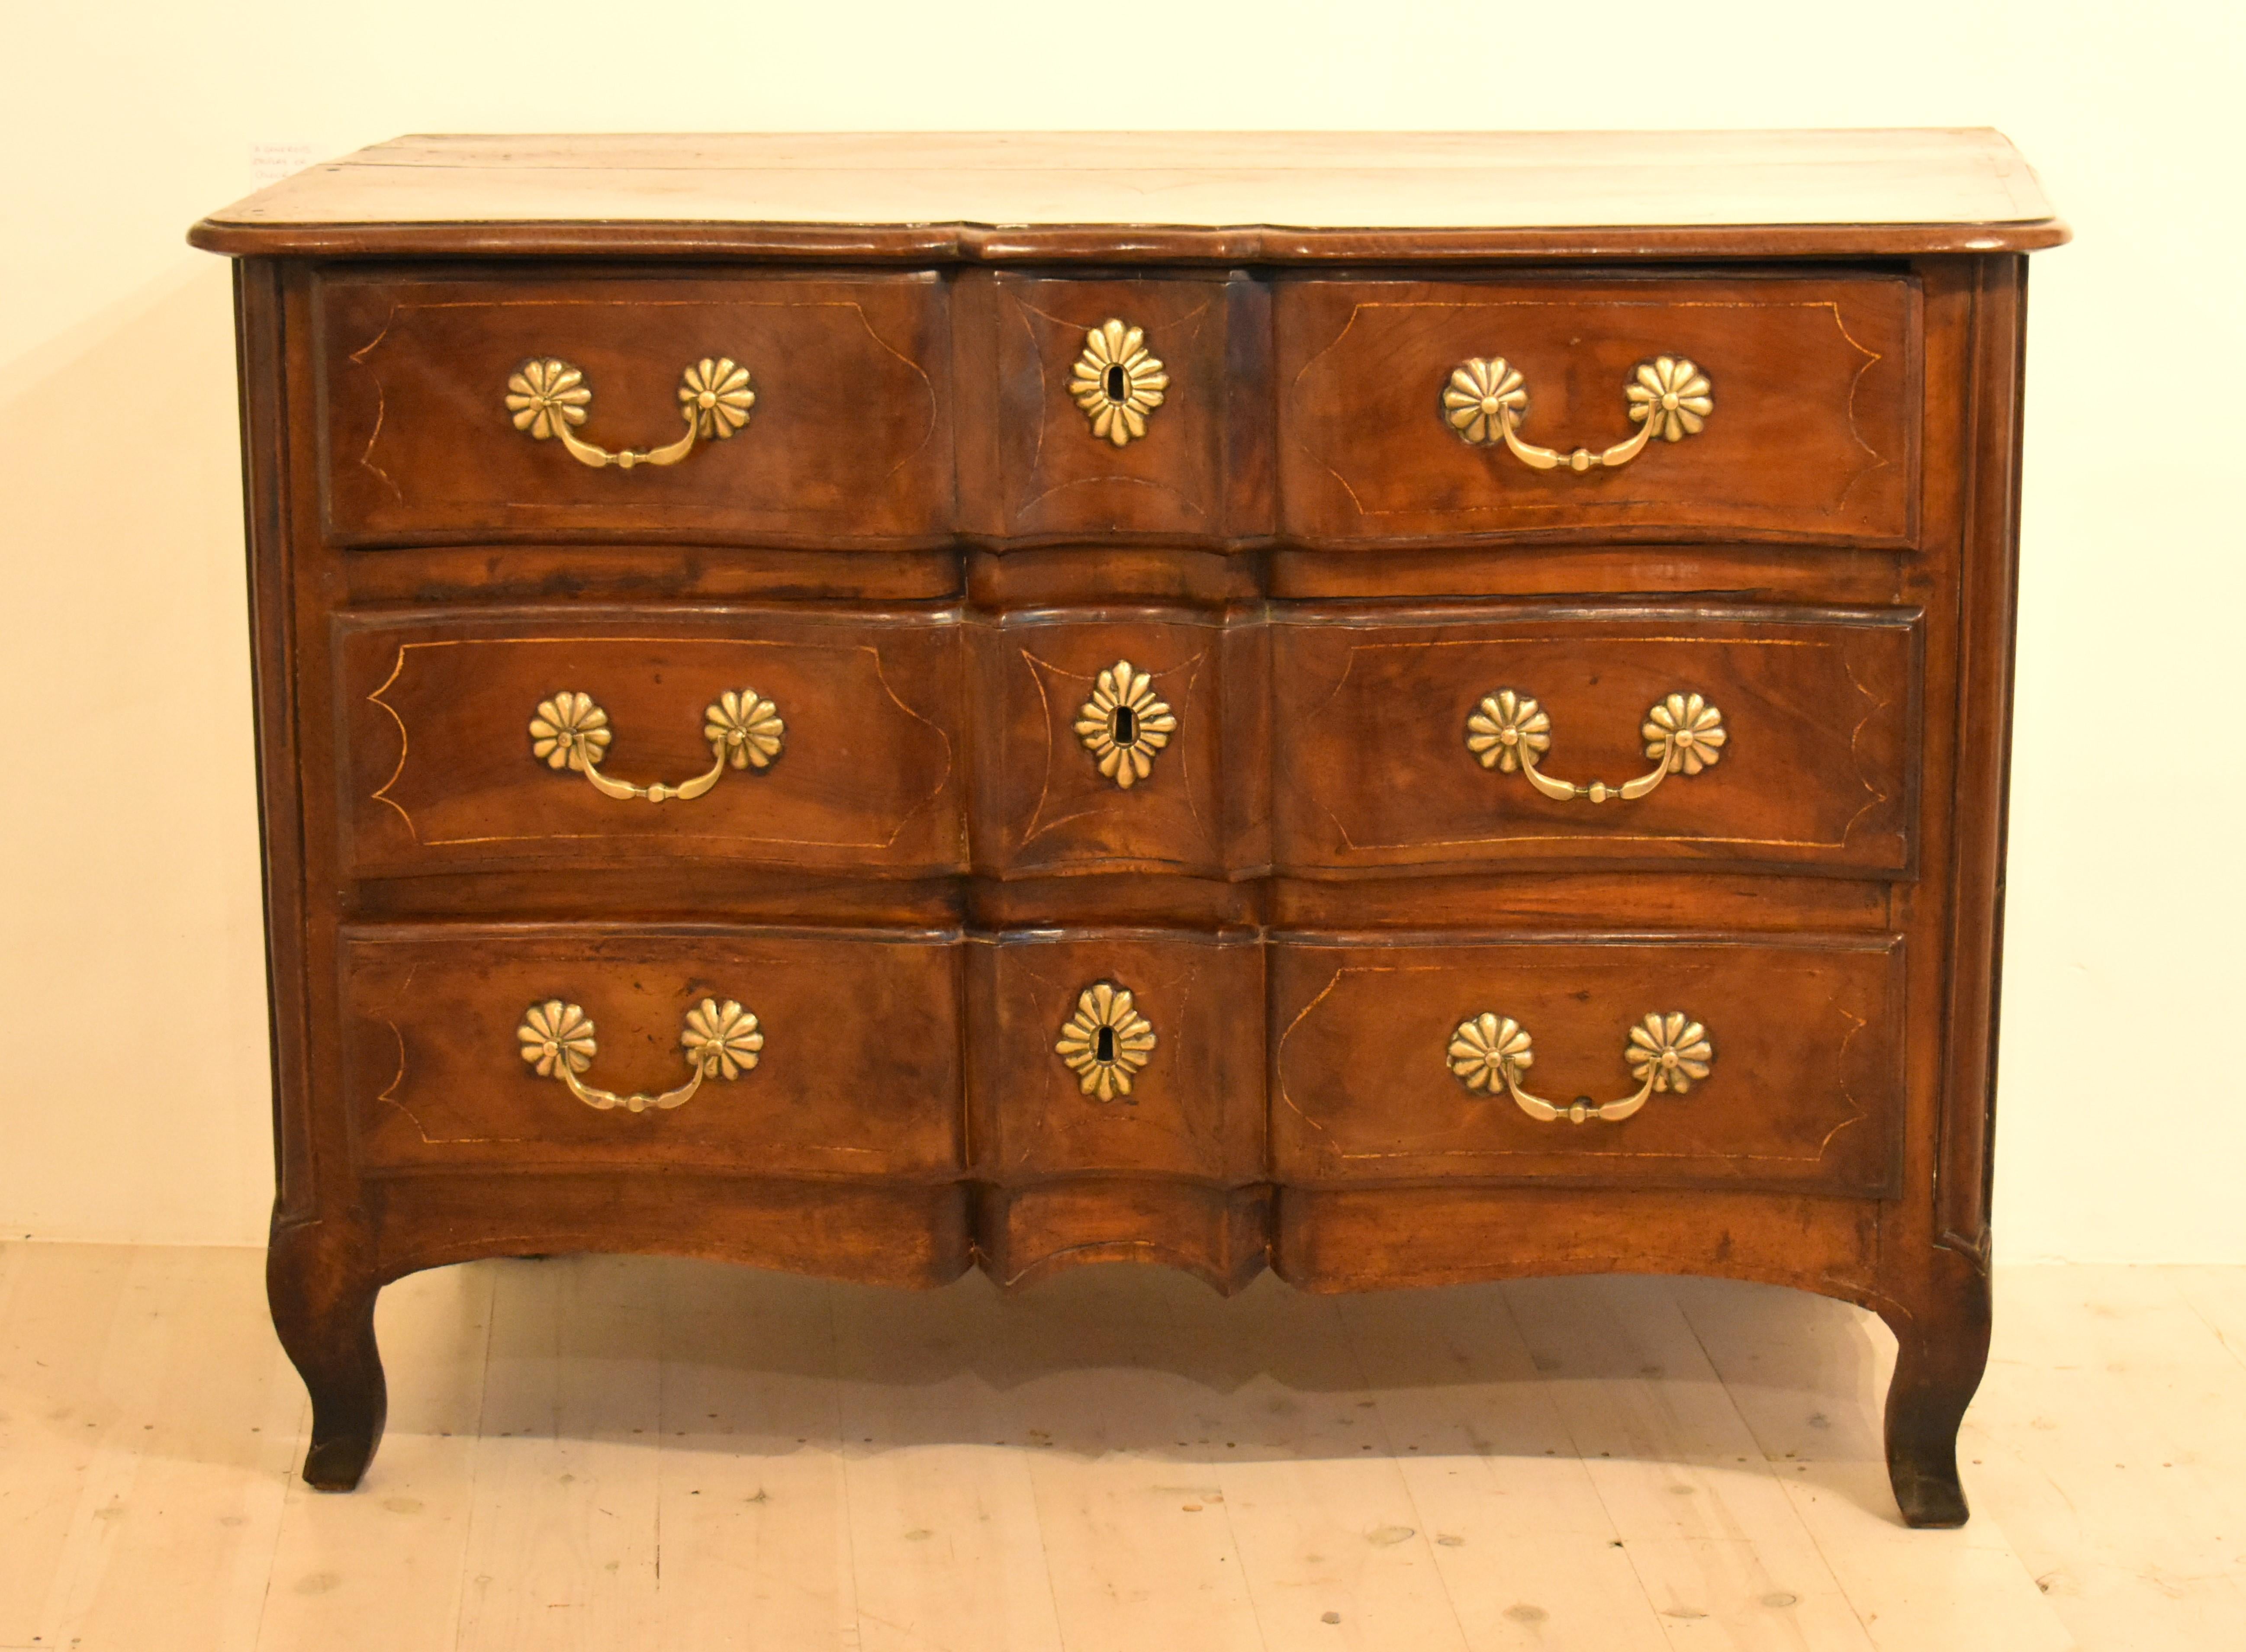 A french provincial walnut chest of drawers in good original condition, Louis the xv in date. These country made chests were copy's of the elegant commodes in the great palaces, but have a great charm of their own and were in chateau's all around